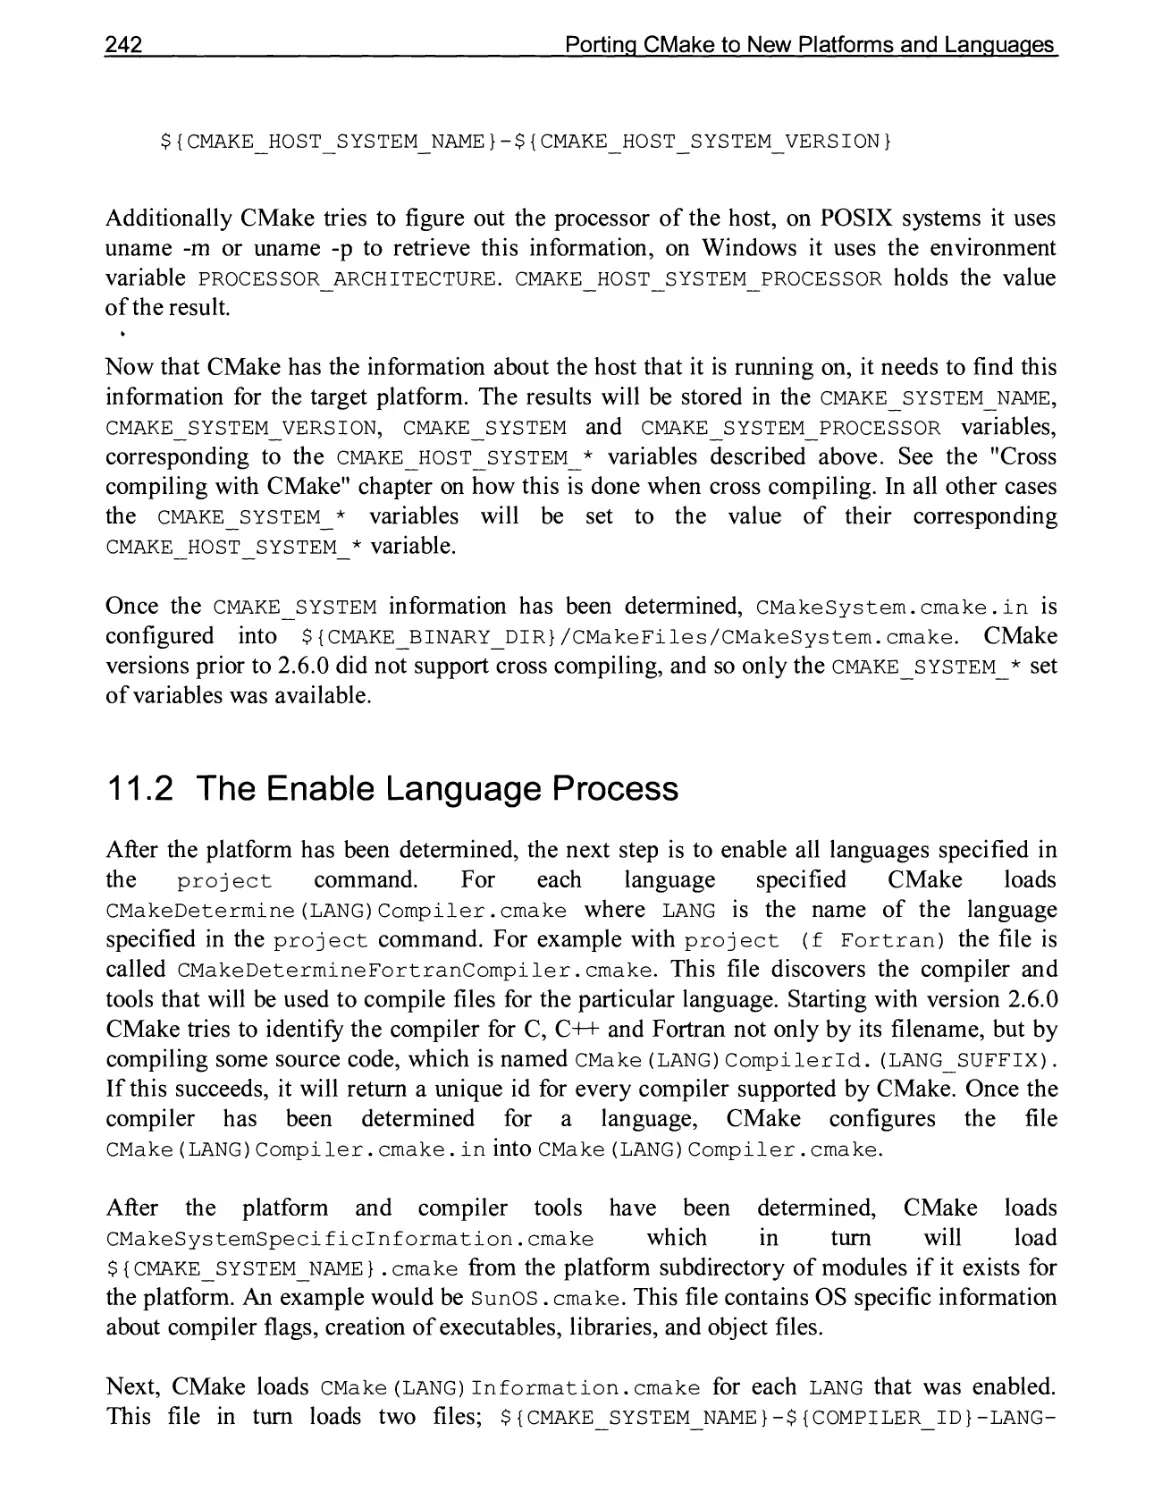 11.2 The Enable Language Process